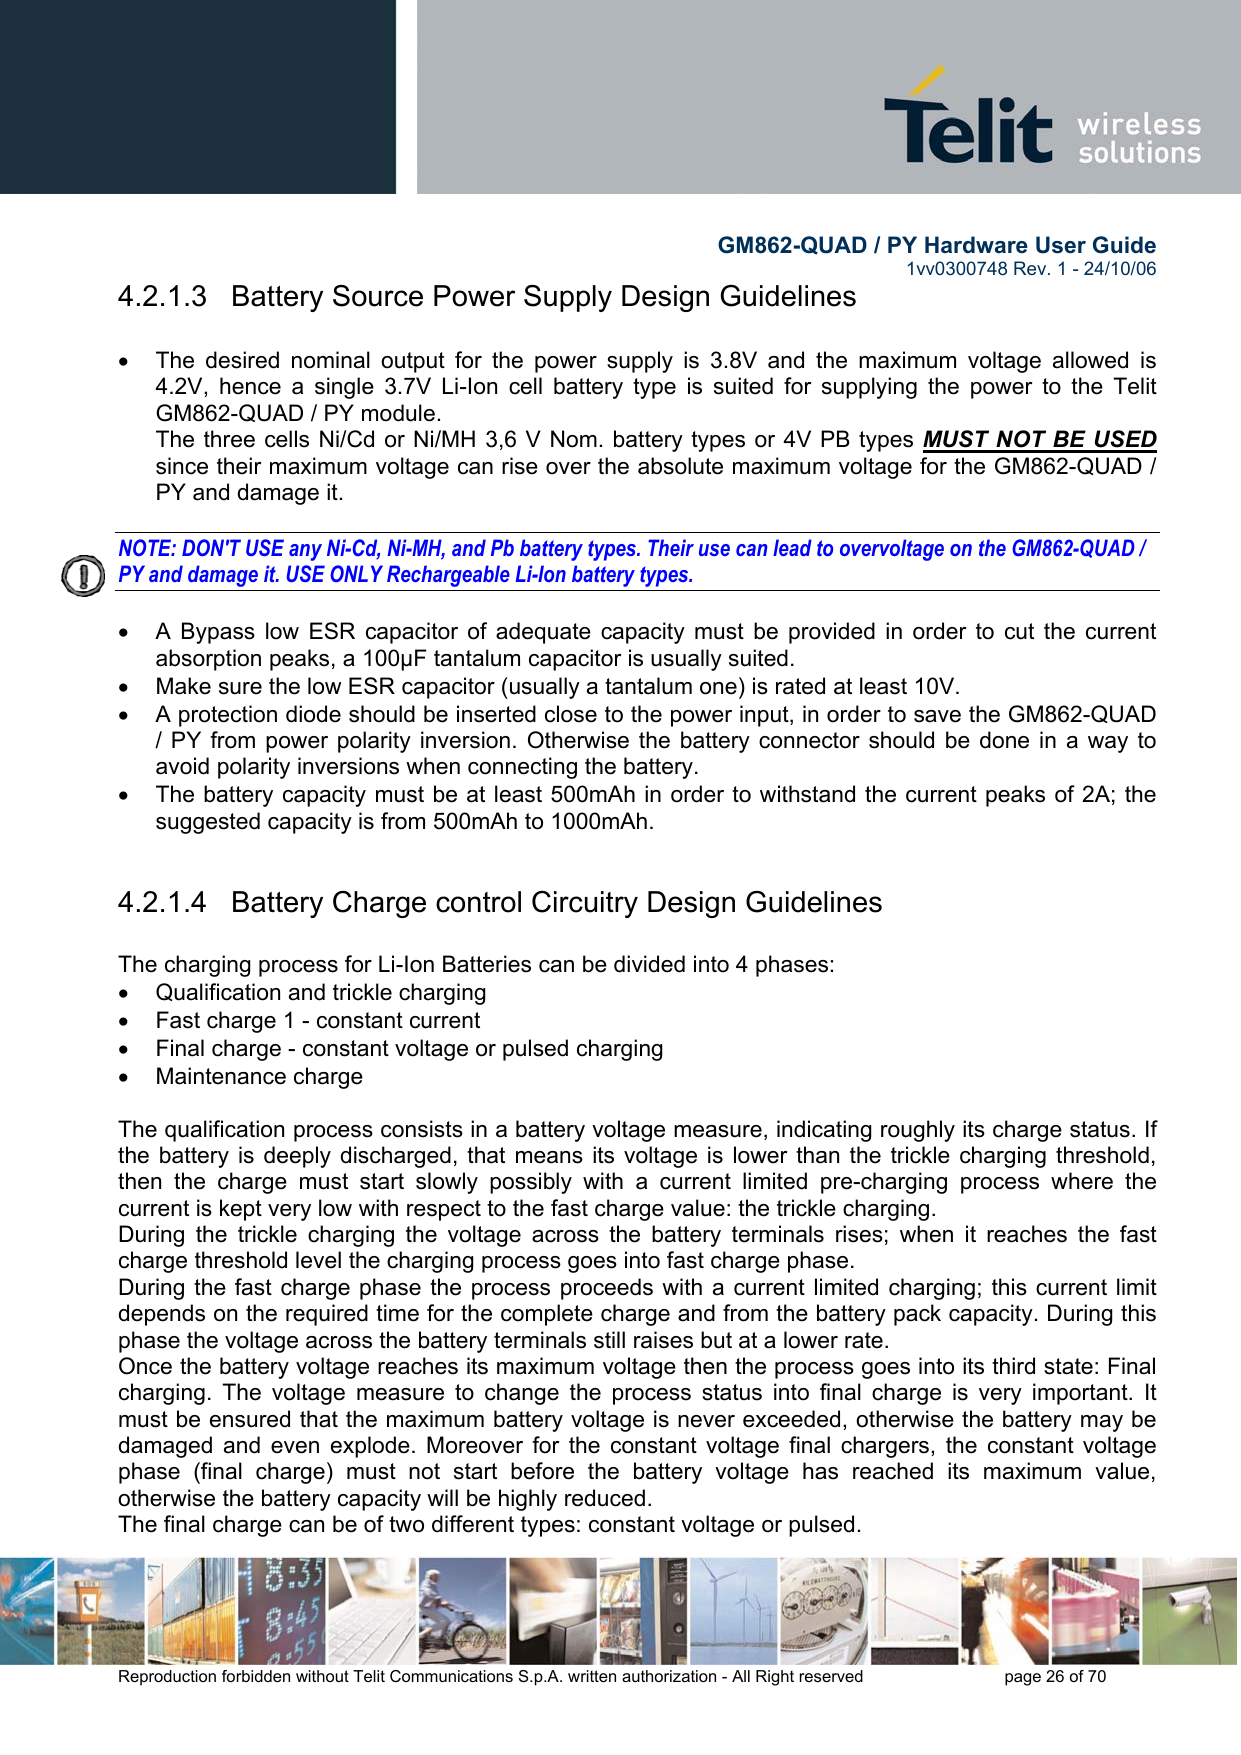        GM862-QUAD / PY Hardware User Guide   1vv0300748 Rev. 1 - 24/10/06    Reproduction forbidden without Telit Communications S.p.A. written authorization - All Right reserved    page 26 of 70  4.2.1.3   Battery Source Power Supply Design Guidelines  •  The desired nominal output for the power supply is 3.8V and the maximum voltage allowed is 4.2V, hence a single 3.7V Li-Ion cell battery type is suited for supplying the power to the Telit GM862-QUAD / PY module. The three cells Ni/Cd or Ni/MH 3,6 V Nom. battery types or 4V PB types MUST NOT BE USED since their maximum voltage can rise over the absolute maximum voltage for the GM862-QUAD / PY and damage it.  NOTE: DON&apos;T USE any Ni-Cd, Ni-MH, and Pb battery types. Their use can lead to overvoltage on the GM862-QUAD / PY and damage it. USE ONLY Rechargeable Li-Ion battery types.  •  A Bypass low ESR capacitor of adequate capacity must be provided in order to cut the current absorption peaks, a 100μF tantalum capacitor is usually suited. •  Make sure the low ESR capacitor (usually a tantalum one) is rated at least 10V. •  A protection diode should be inserted close to the power input, in order to save the GM862-QUAD / PY from power polarity inversion. Otherwise the battery connector should be done in a way to avoid polarity inversions when connecting the battery. •  The battery capacity must be at least 500mAh in order to withstand the current peaks of 2A; the suggested capacity is from 500mAh to 1000mAh.  4.2.1.4   Battery Charge control Circuitry Design Guidelines  The charging process for Li-Ion Batteries can be divided into 4 phases: •  Qualification and trickle charging •  Fast charge 1 - constant current •  Final charge - constant voltage or pulsed charging •  Maintenance charge   The qualification process consists in a battery voltage measure, indicating roughly its charge status. If the battery is deeply discharged, that means its voltage is lower than the trickle charging threshold, then the charge must start slowly possibly with a current limited pre-charging process where the current is kept very low with respect to the fast charge value: the trickle charging. During the trickle charging the voltage across the battery terminals rises; when it reaches the fast charge threshold level the charging process goes into fast charge phase. During the fast charge phase the process proceeds with a current limited charging; this current limit depends on the required time for the complete charge and from the battery pack capacity. During this phase the voltage across the battery terminals still raises but at a lower rate. Once the battery voltage reaches its maximum voltage then the process goes into its third state: Final  charging. The voltage measure to change the process status into final charge is very important. It must be ensured that the maximum battery voltage is never exceeded, otherwise the battery may be damaged and even explode. Moreover for the constant voltage final chargers, the constant voltage phase (final charge) must not start before the battery voltage has reached its maximum value, otherwise the battery capacity will be highly reduced. The final charge can be of two different types: constant voltage or pulsed. 